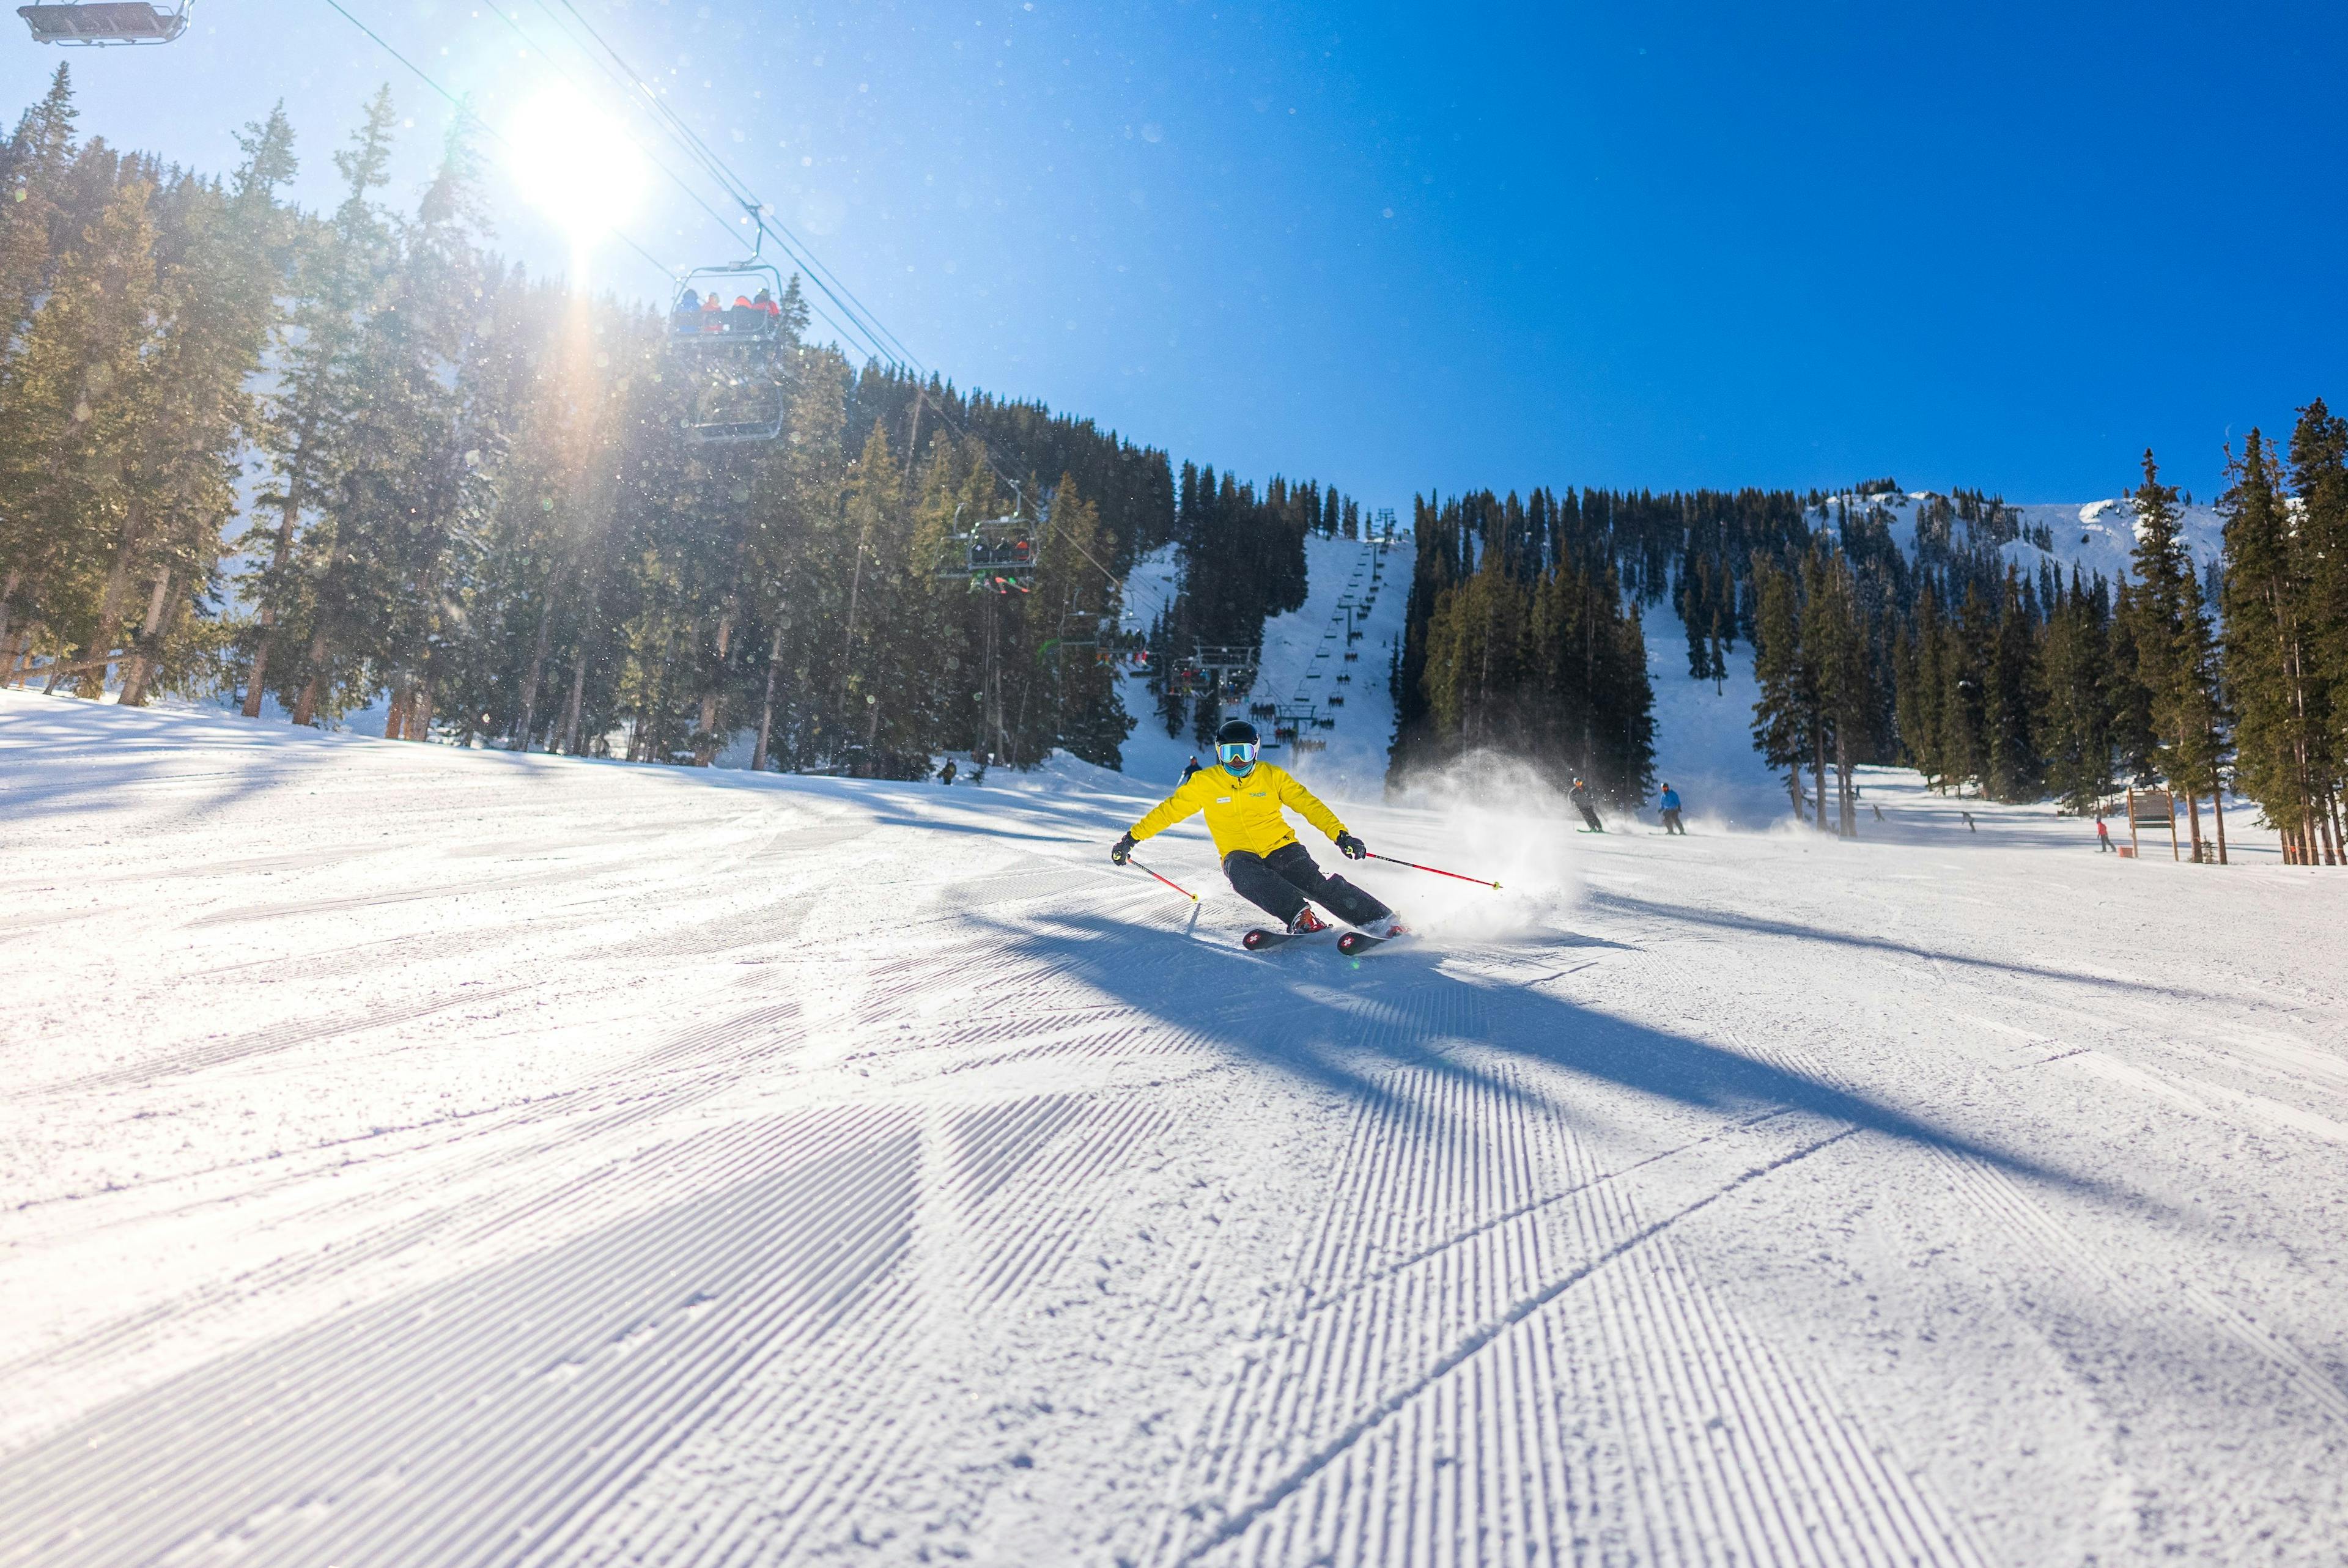 Snowsports instructor demonstrates tight ski racing turns on a groomer